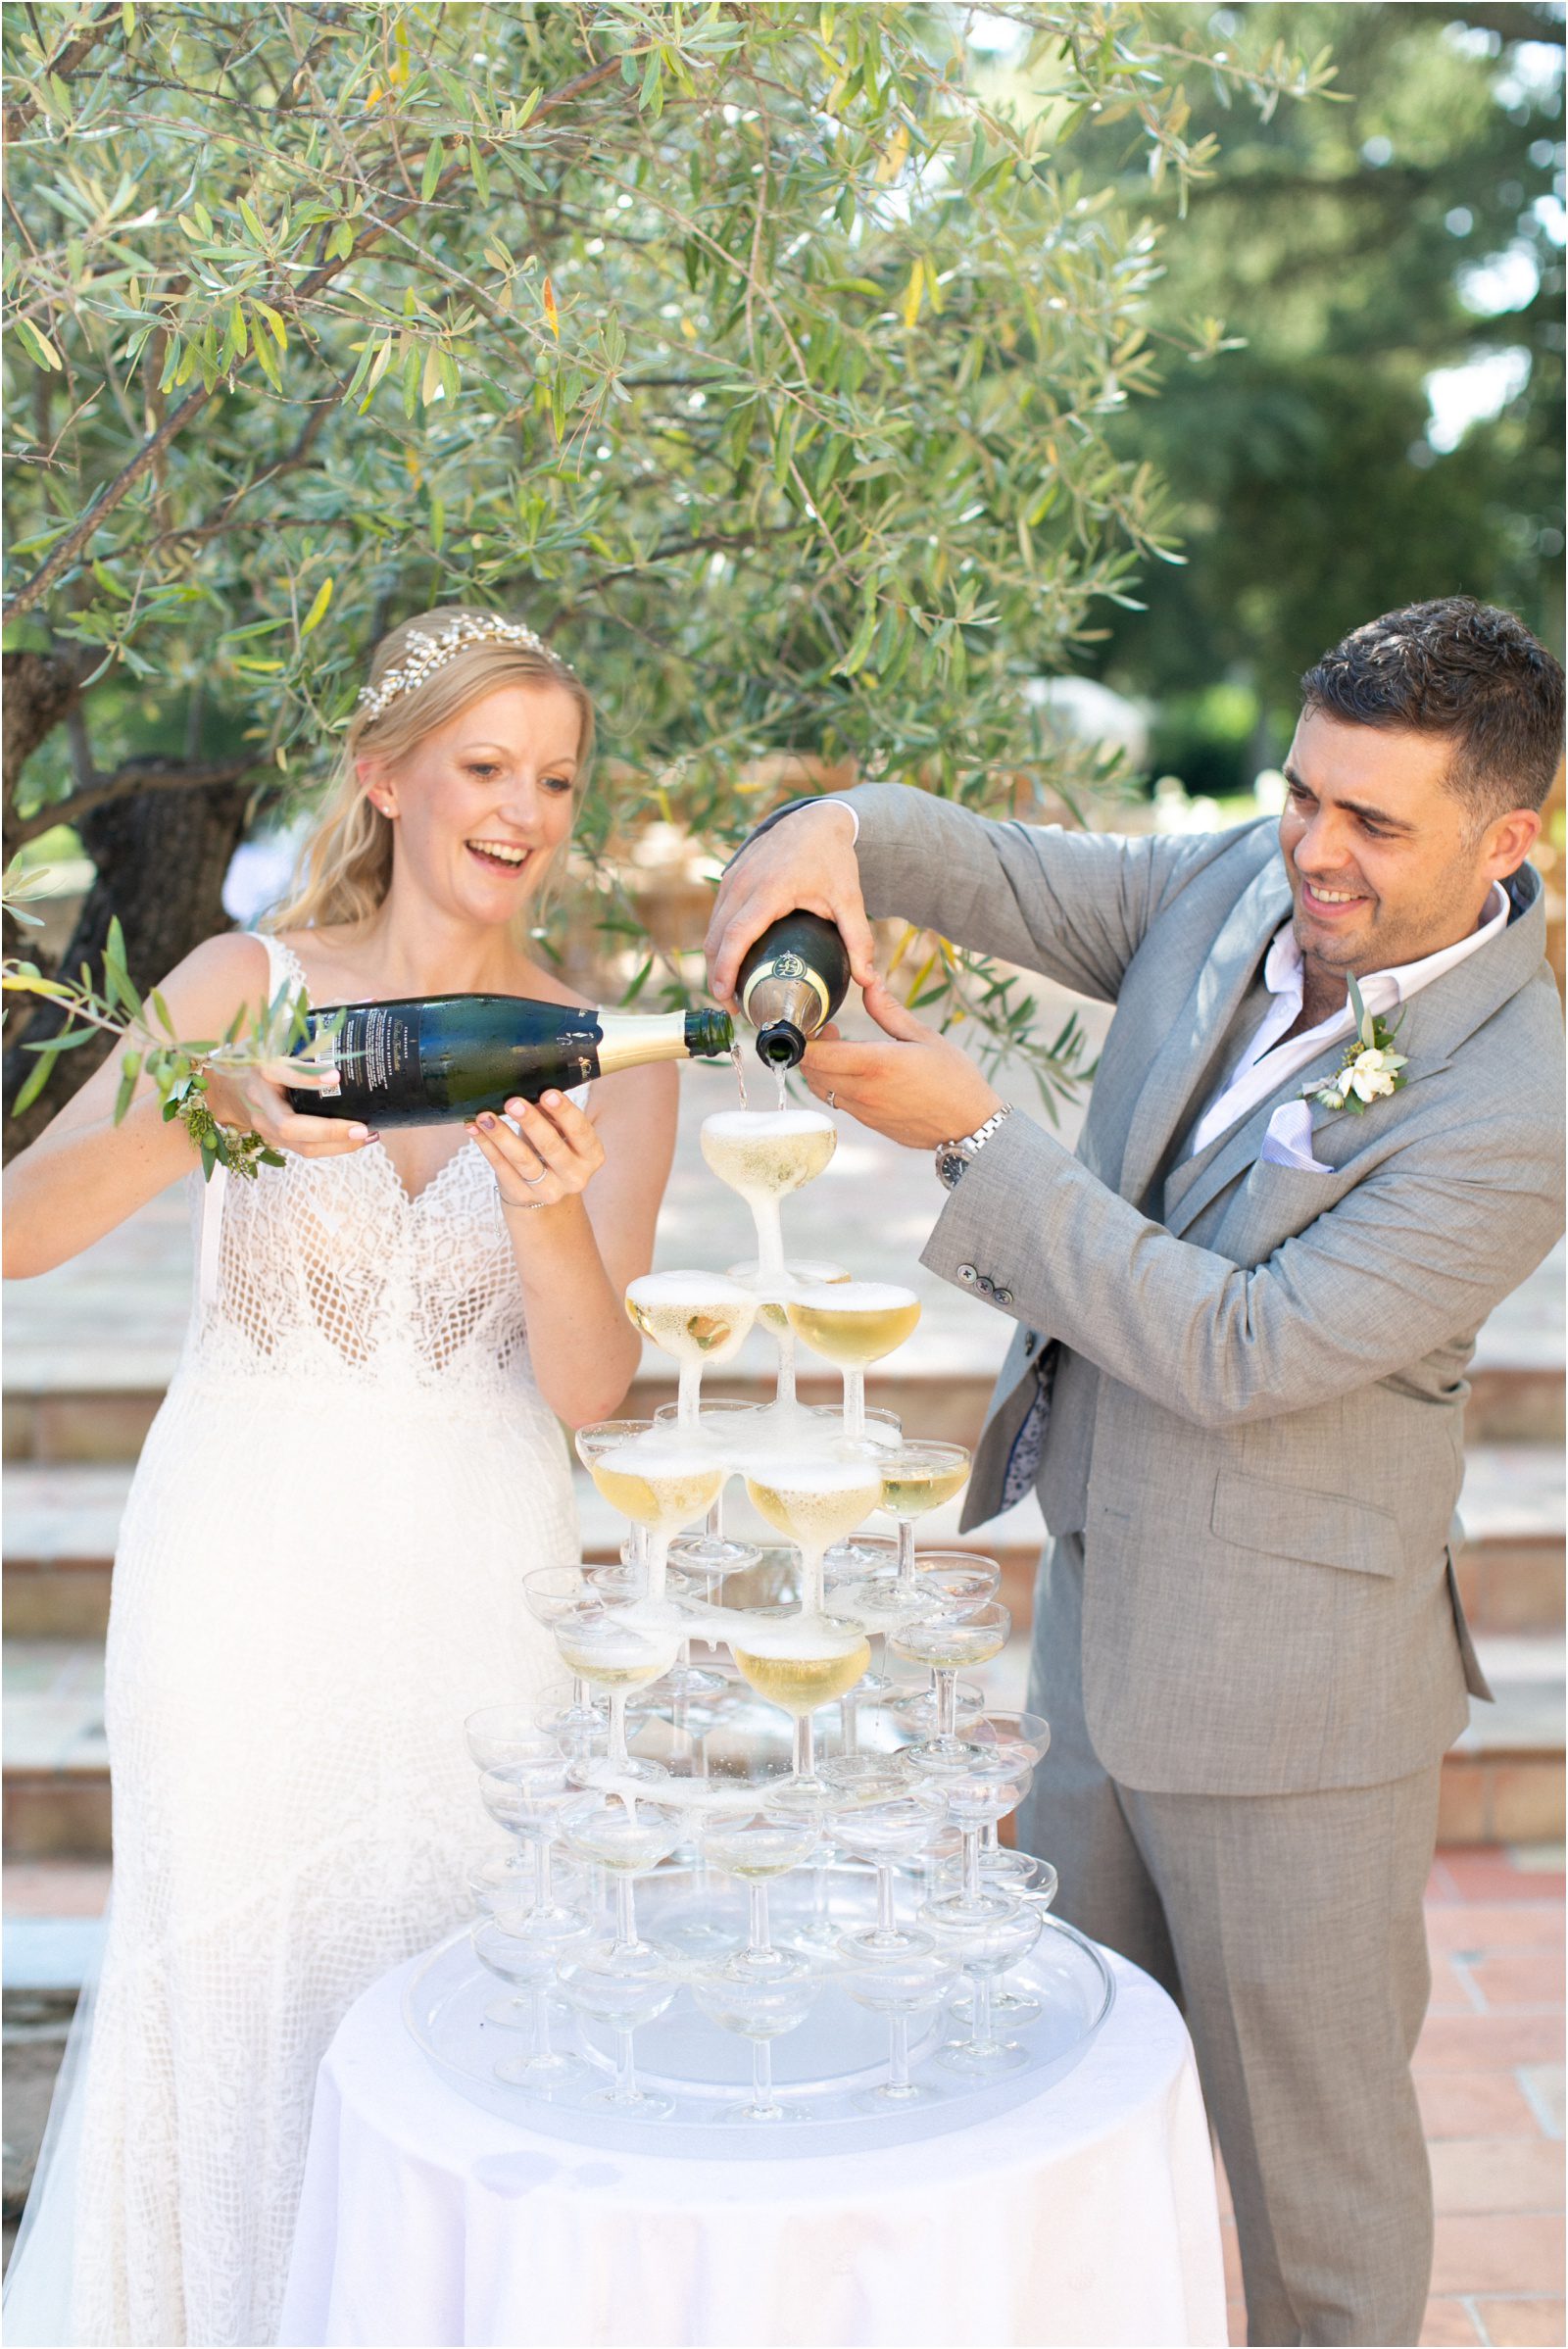 Wedding champagne tower at a Provence wedding